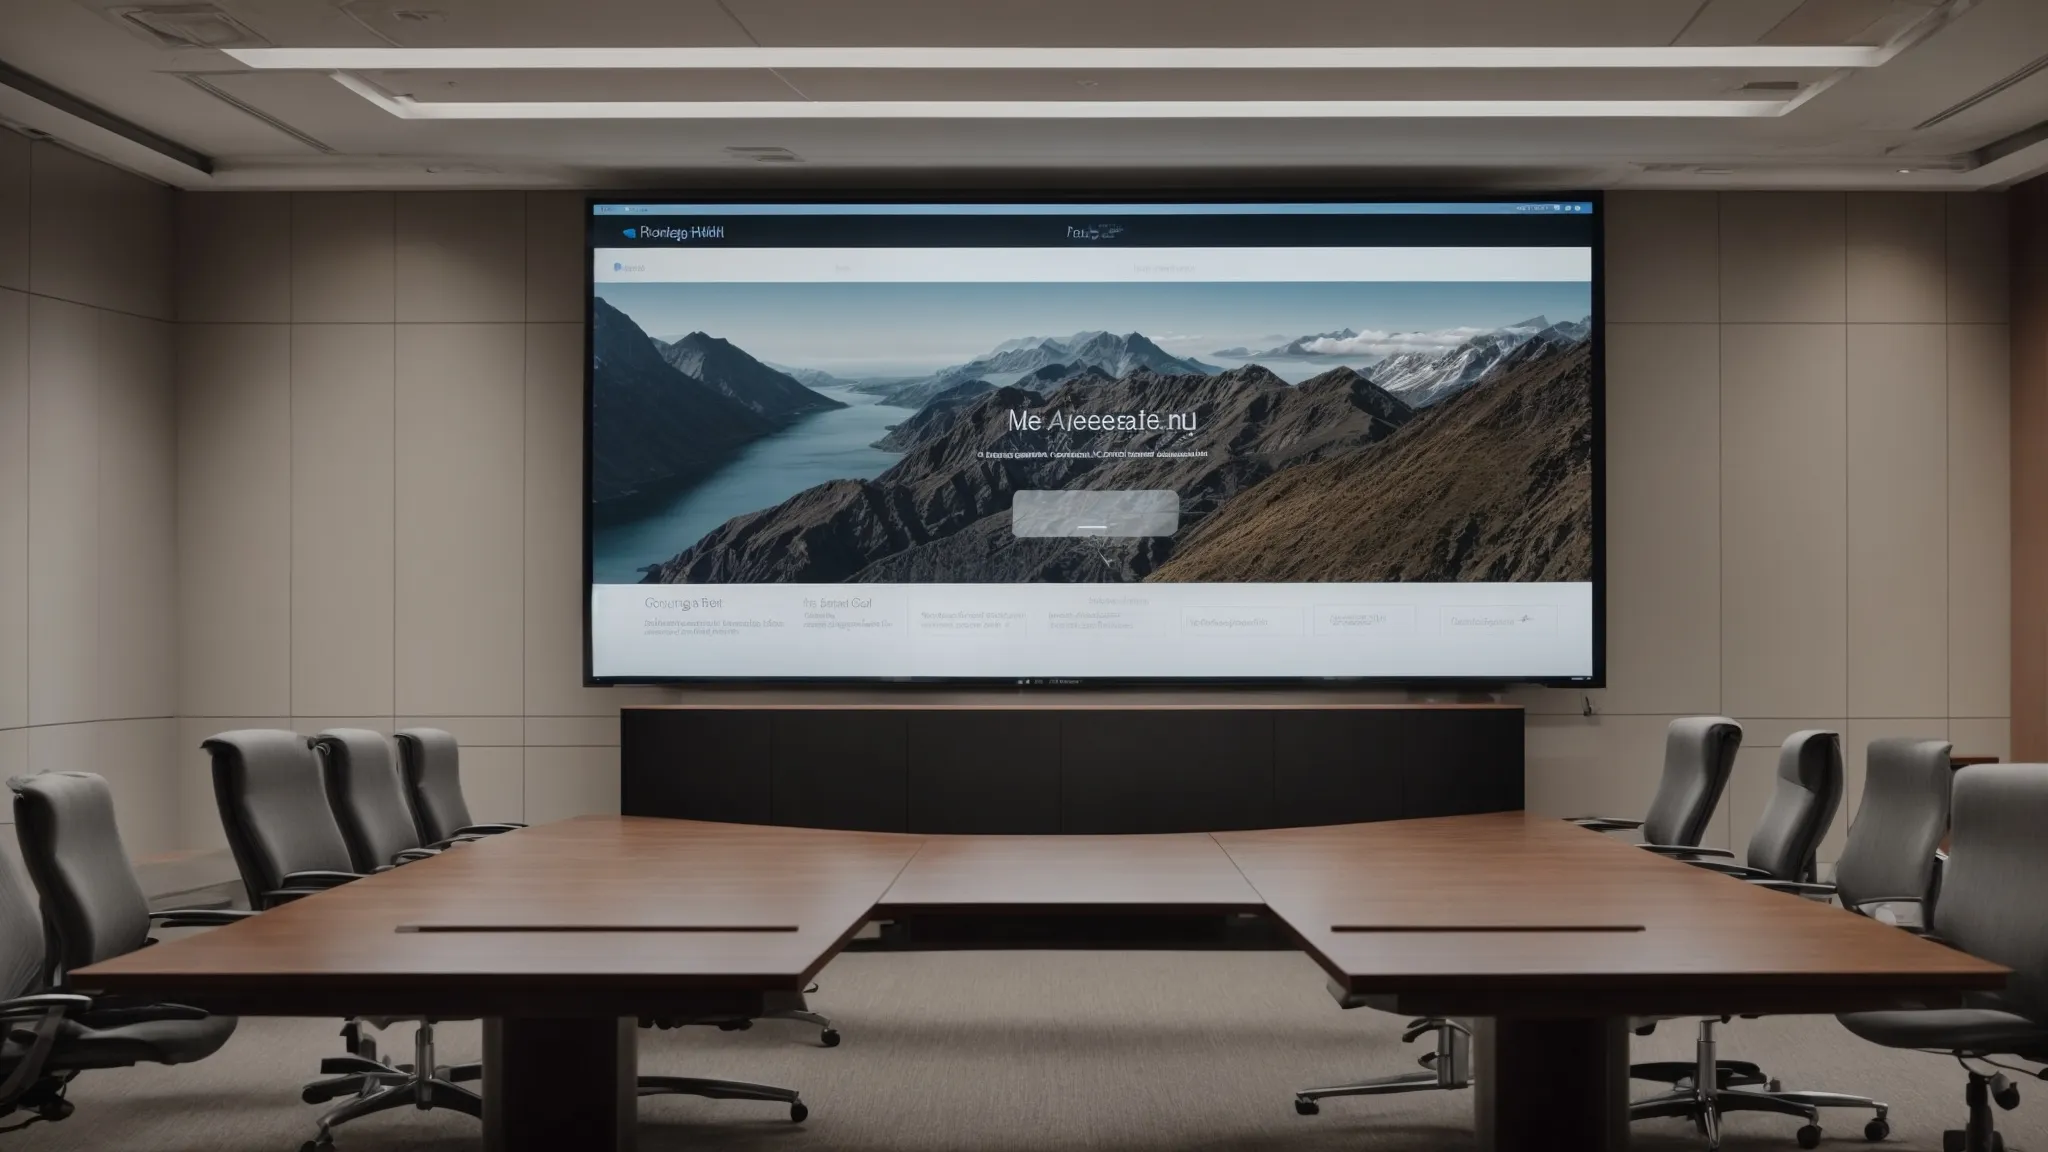 a corporate meeting room with a large screen displaying a search engine results page.